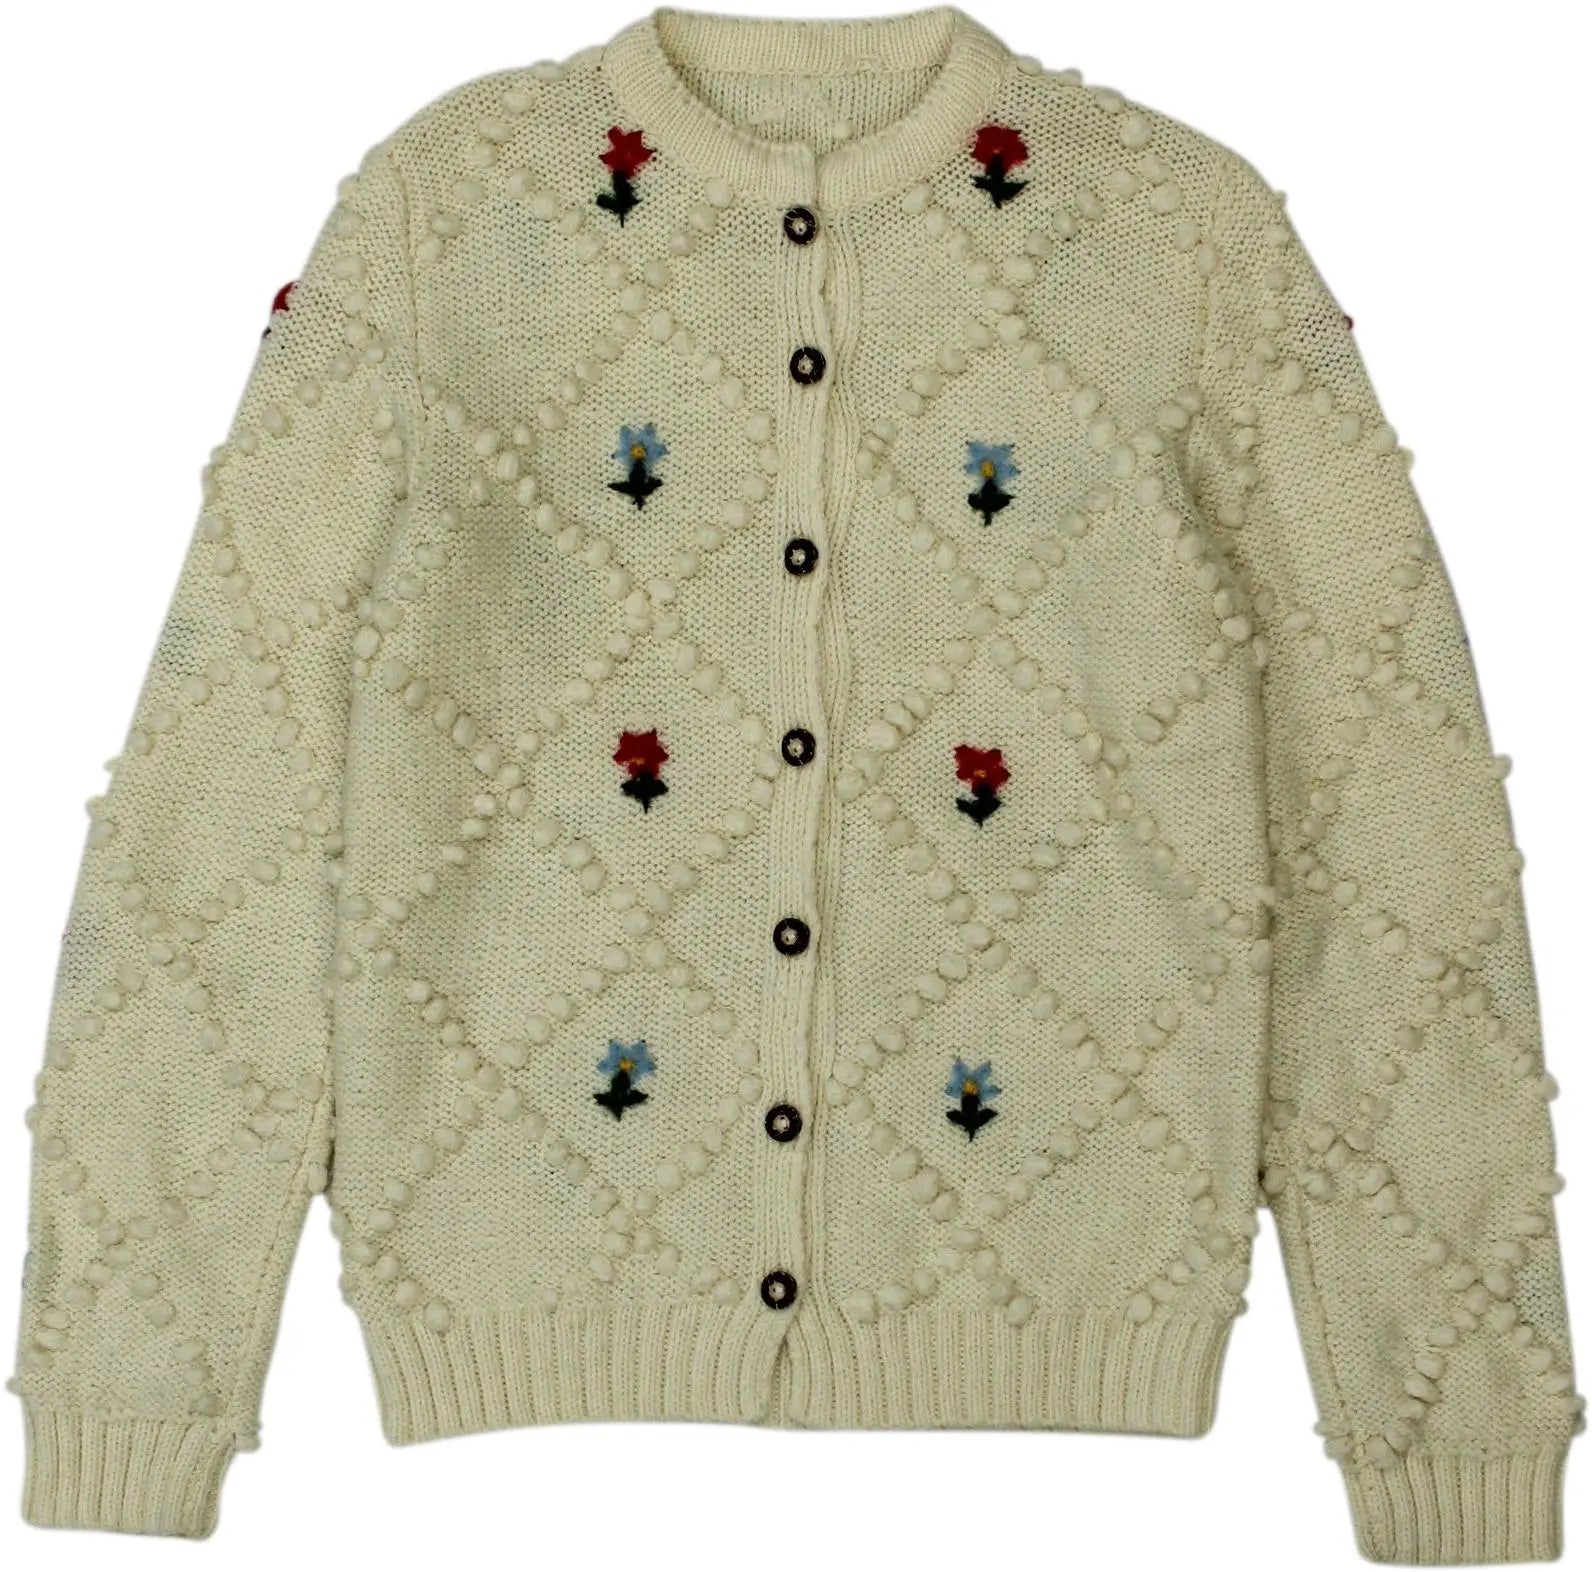 Handmade - Knitted Cardigan- ThriftTale.com - Vintage and second handclothing